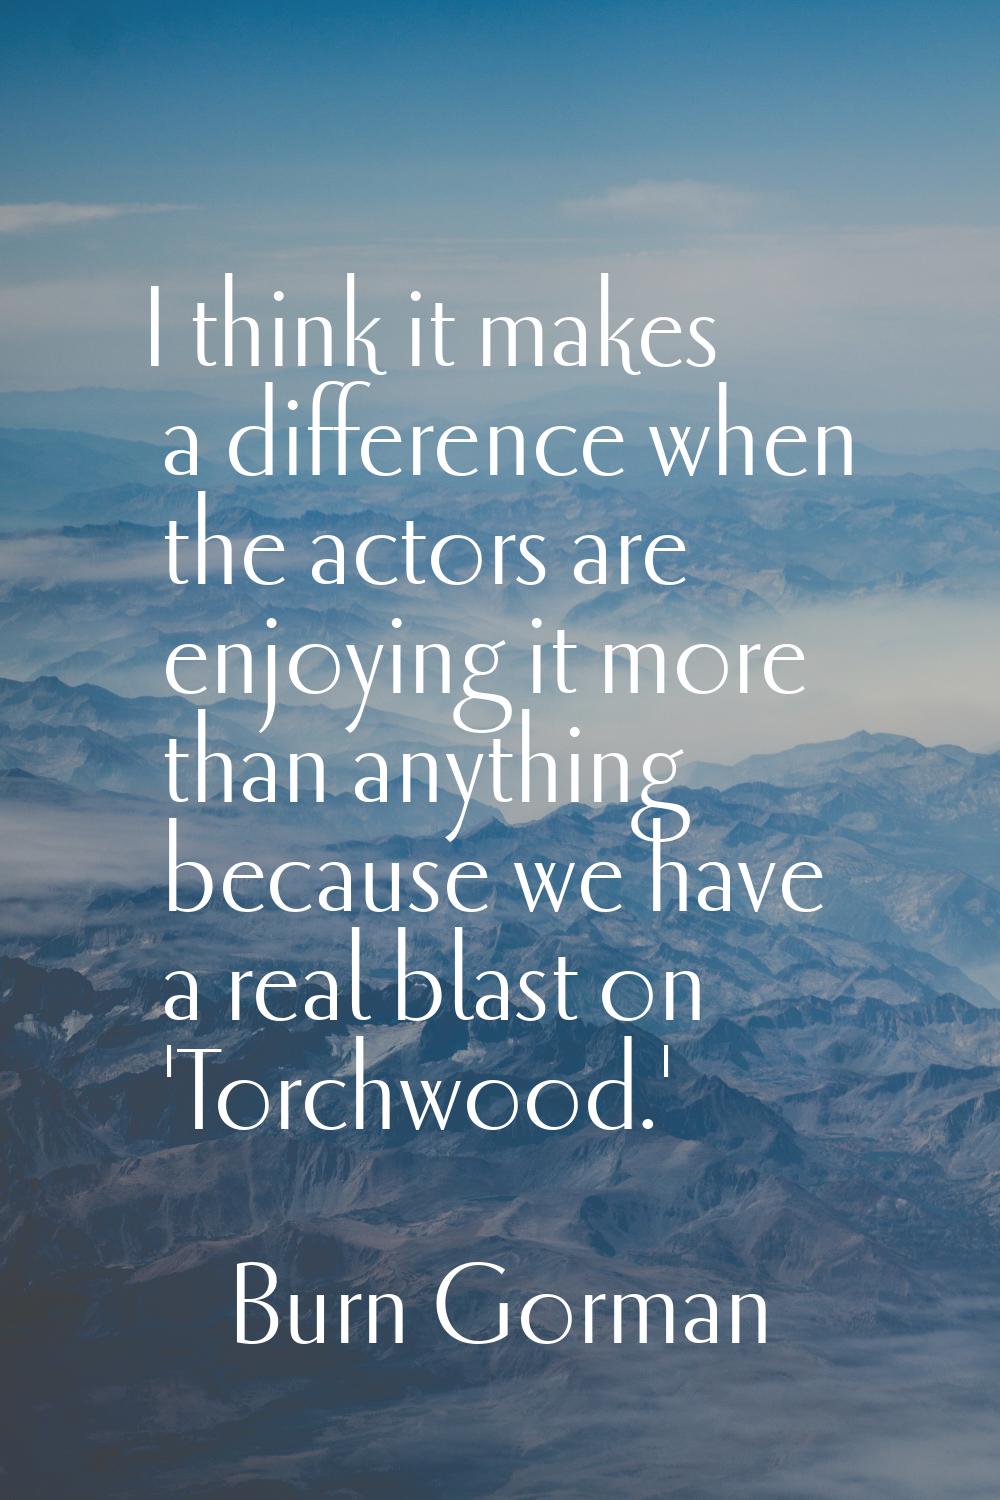 I think it makes a difference when the actors are enjoying it more than anything because we have a 